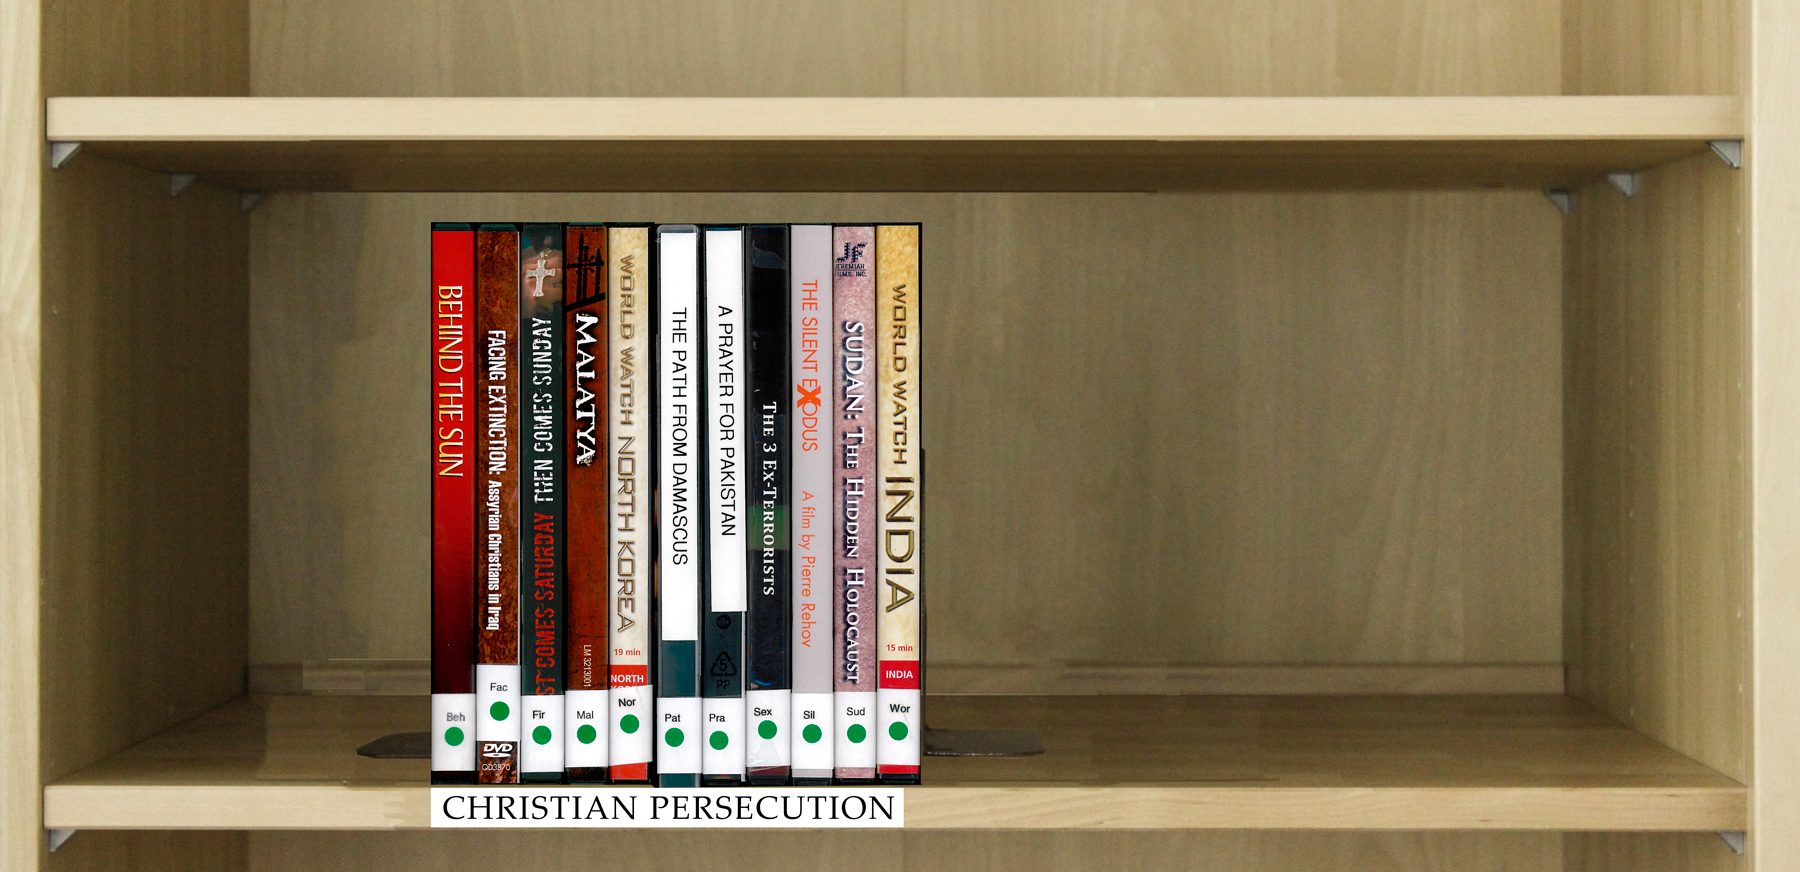 Index of DVD's Under the Category Christian Persecution.